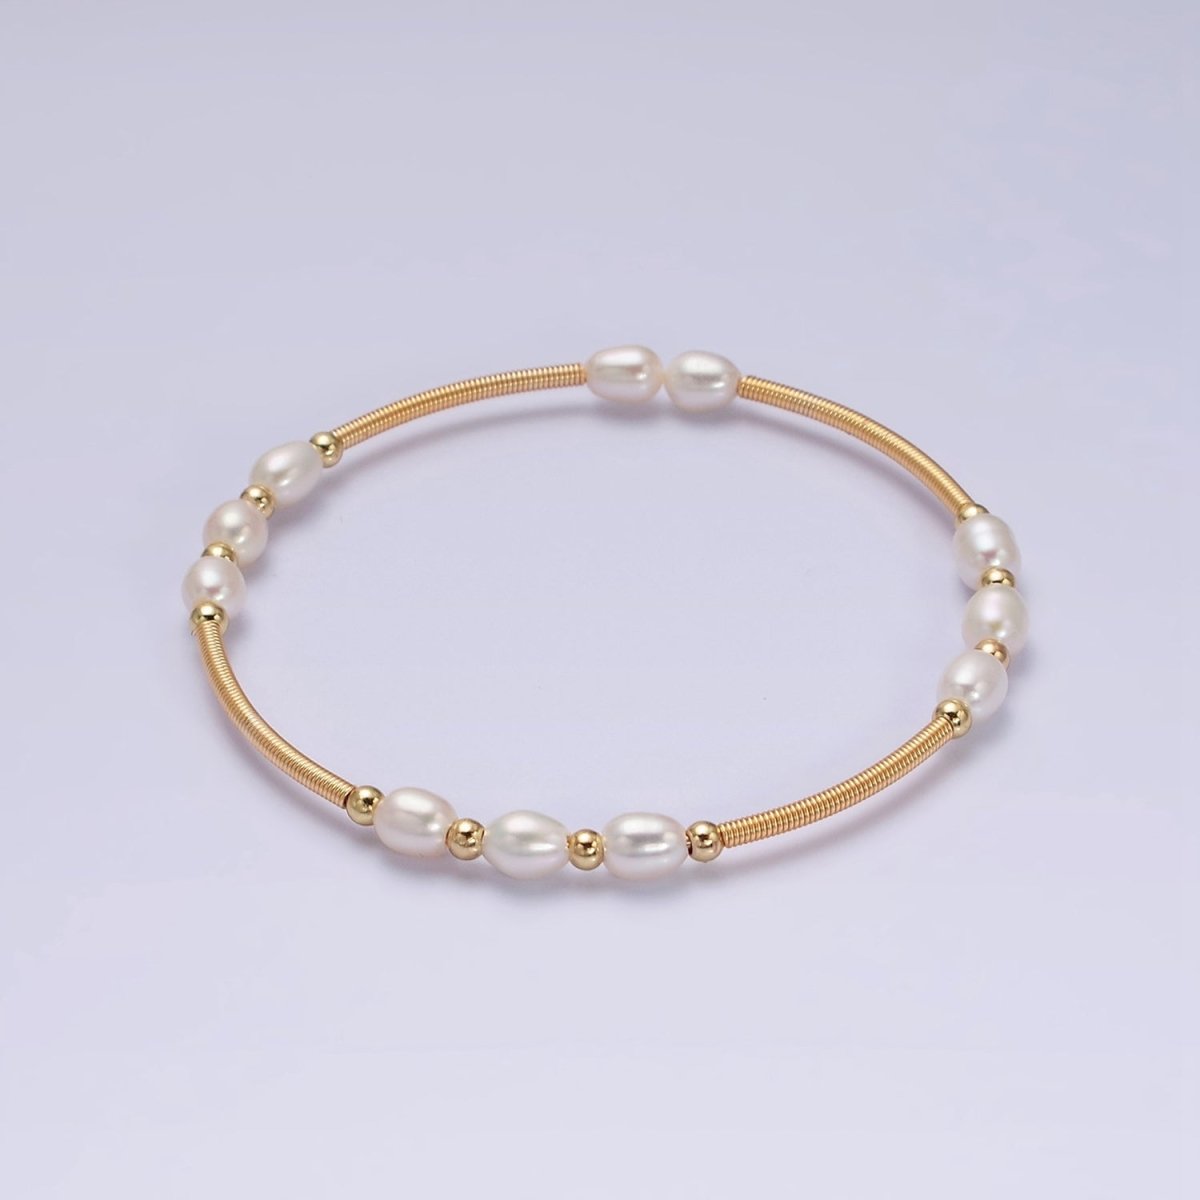 Petite Pearl Cuff Bracelet White or Pink Pearls Gold Filled Cuff bracelet Textured Bracelet | WA-1864 WA-1865 Clearance Pricing - DLUXCA